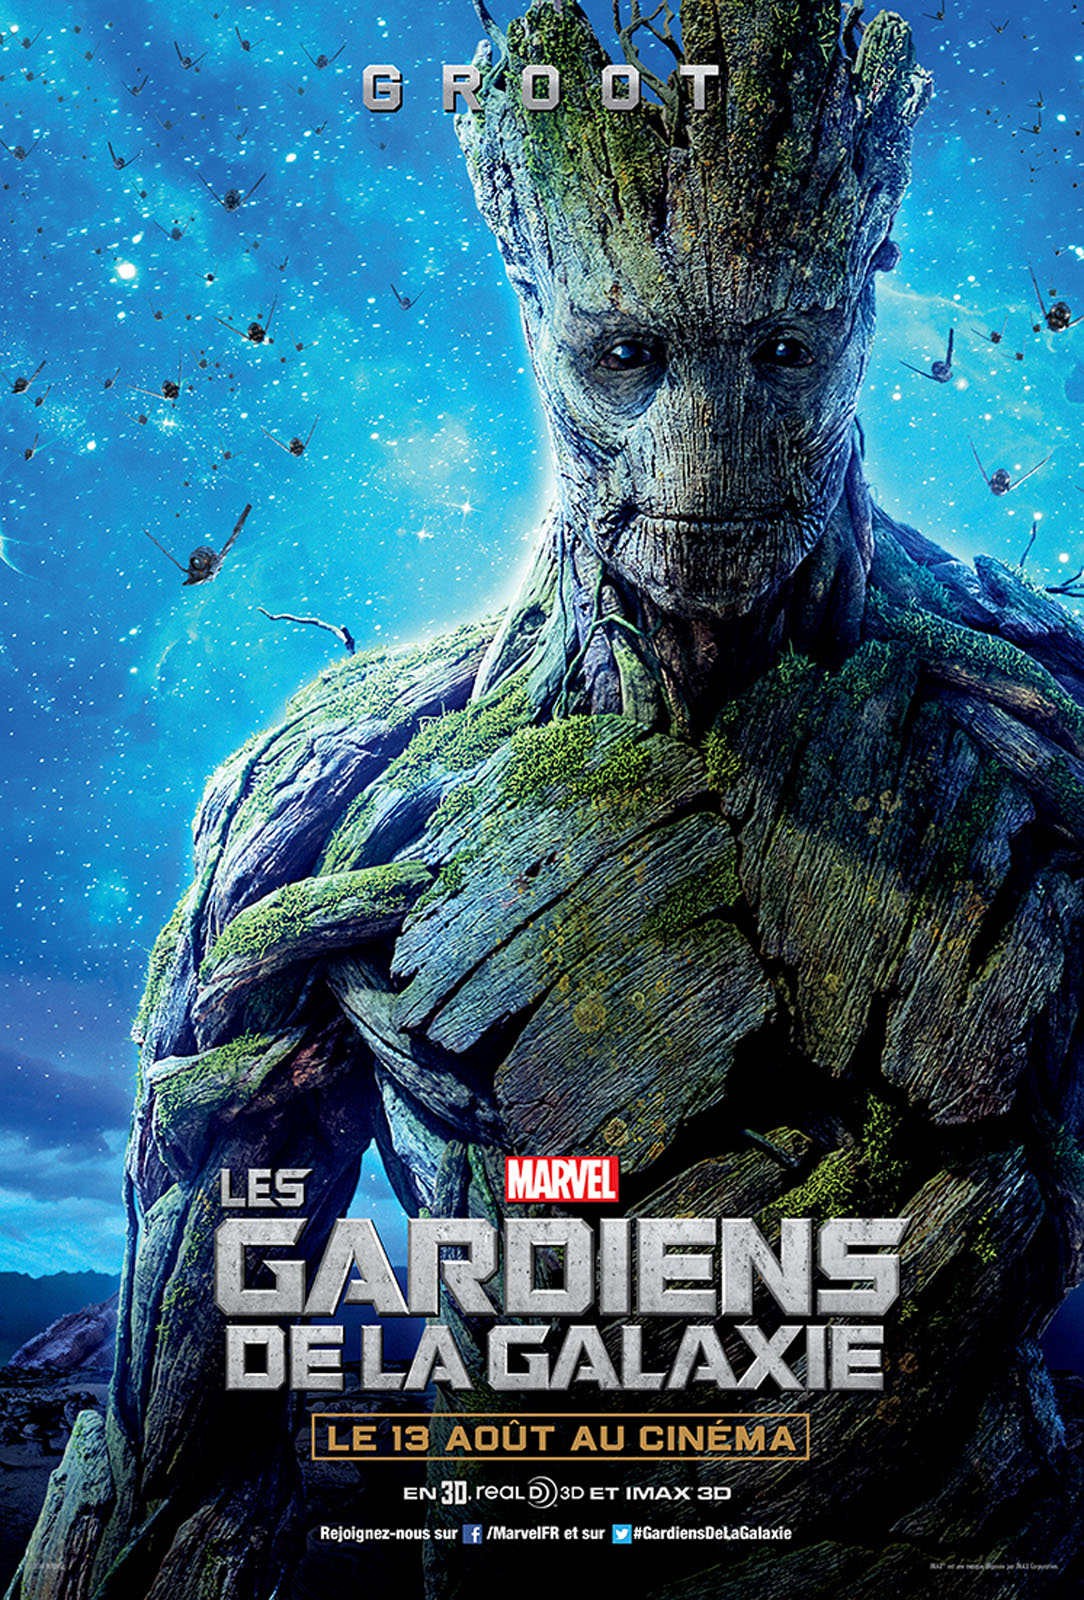 Groot From Guardians Of The Galaxy Wallpaper Click Picture For High